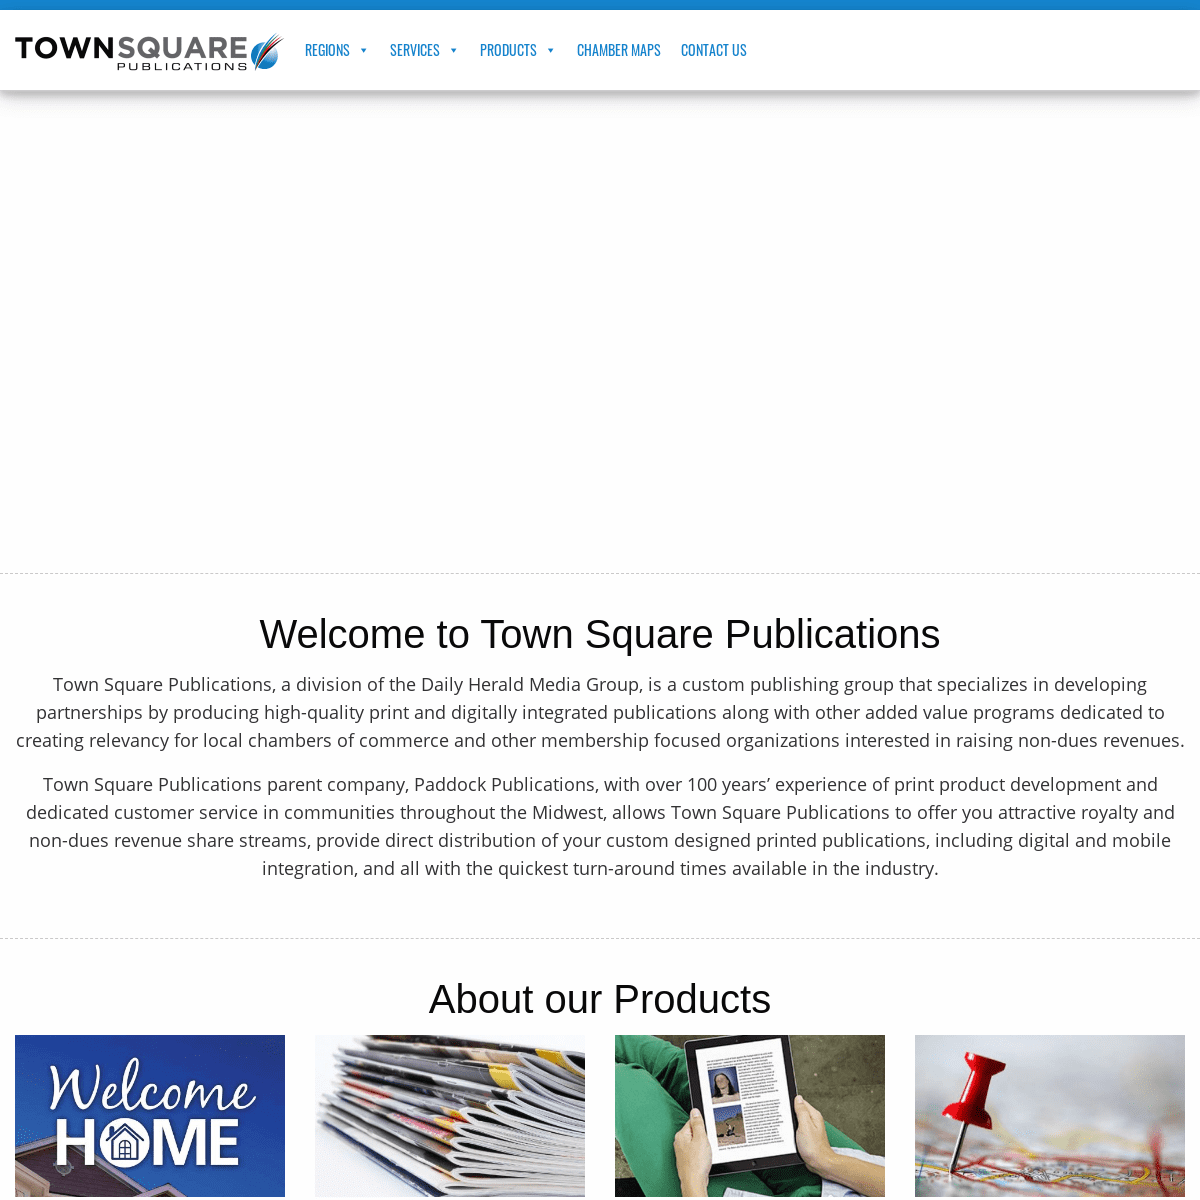 A complete backup of https://townsquarepublications.com